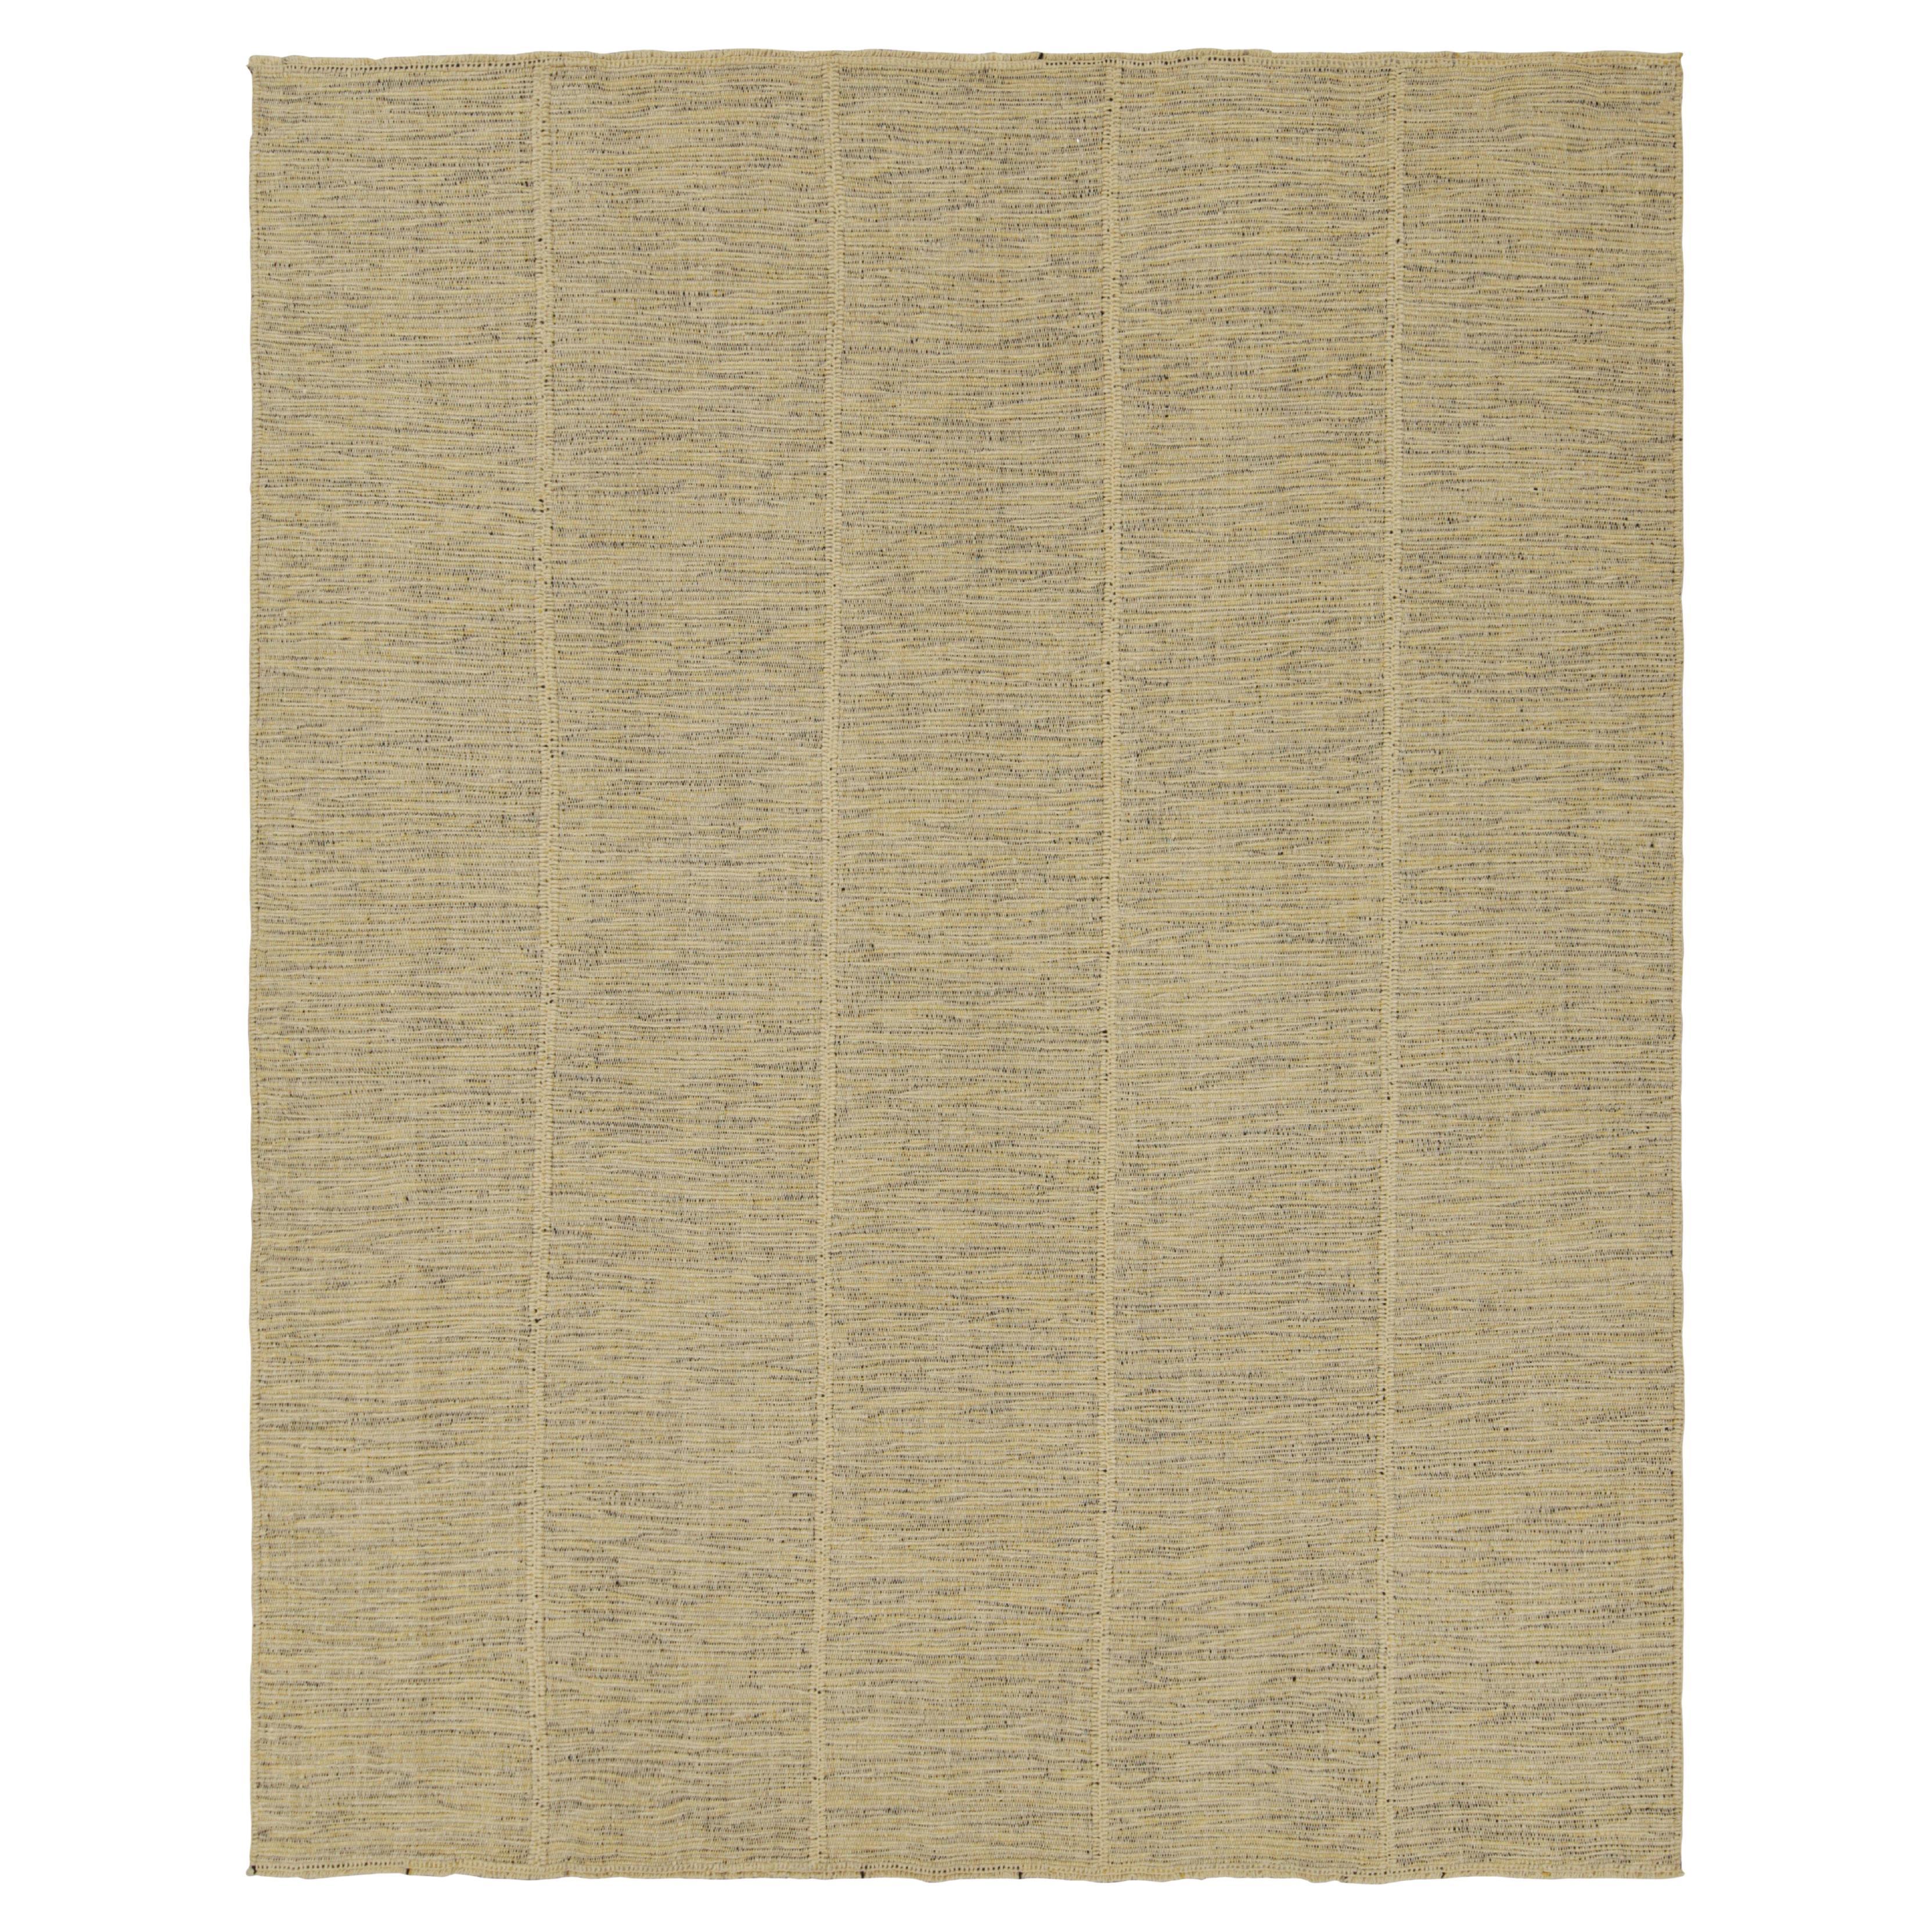 Rug & Kilim’s Contemporary Kilim with Stripes in Beige, Gold and Black